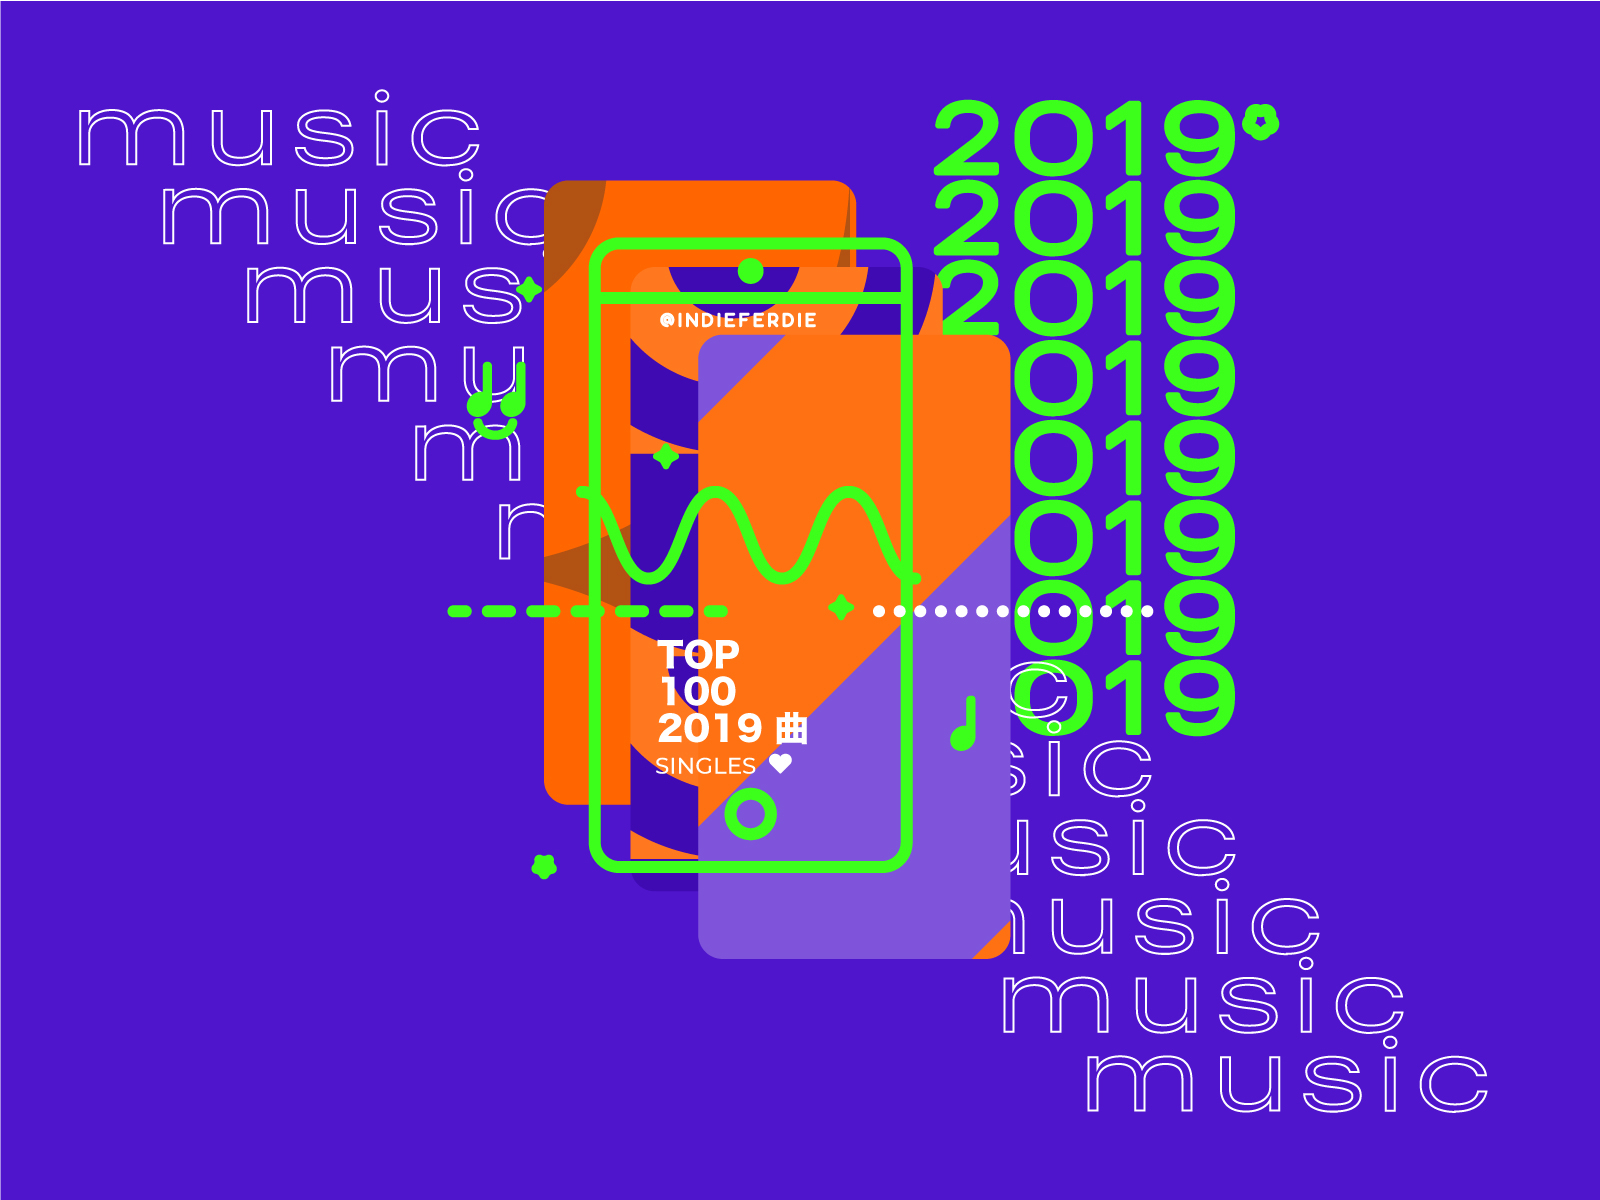 Top 100 of 2019 colorful flat geometric illustration music phone ux vector